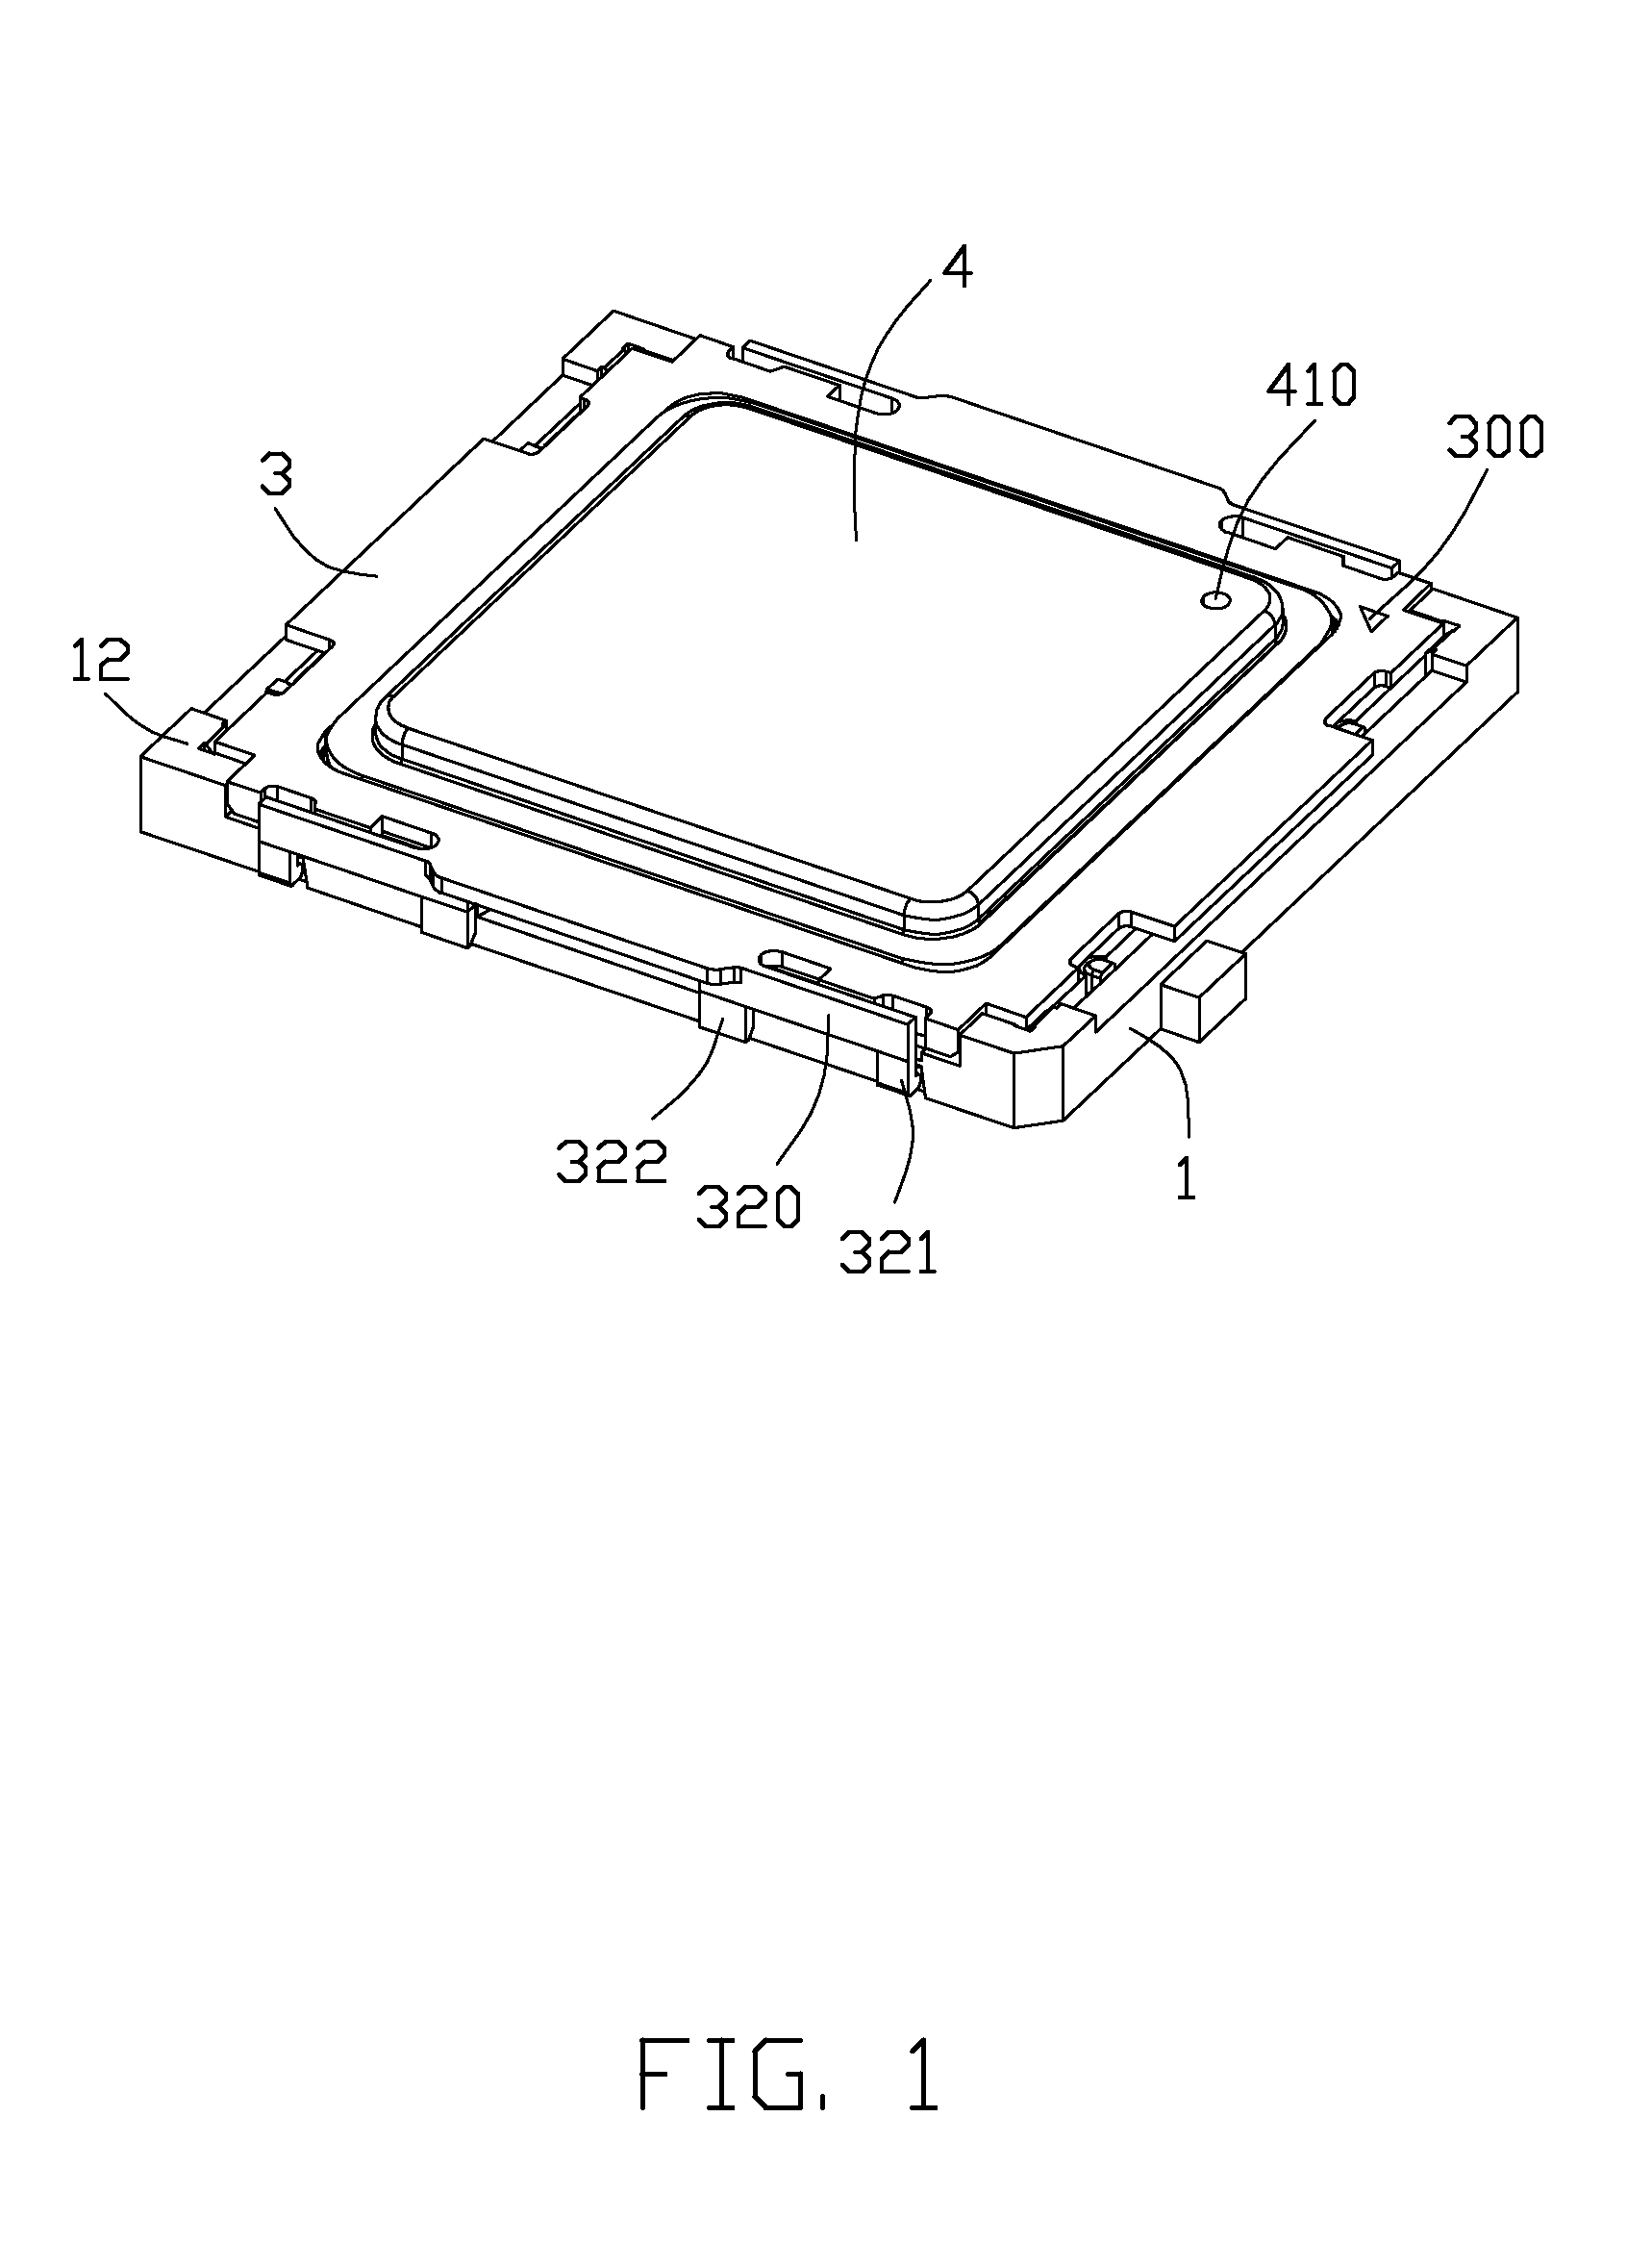 Electrical connector with carrier frame loading electronic package